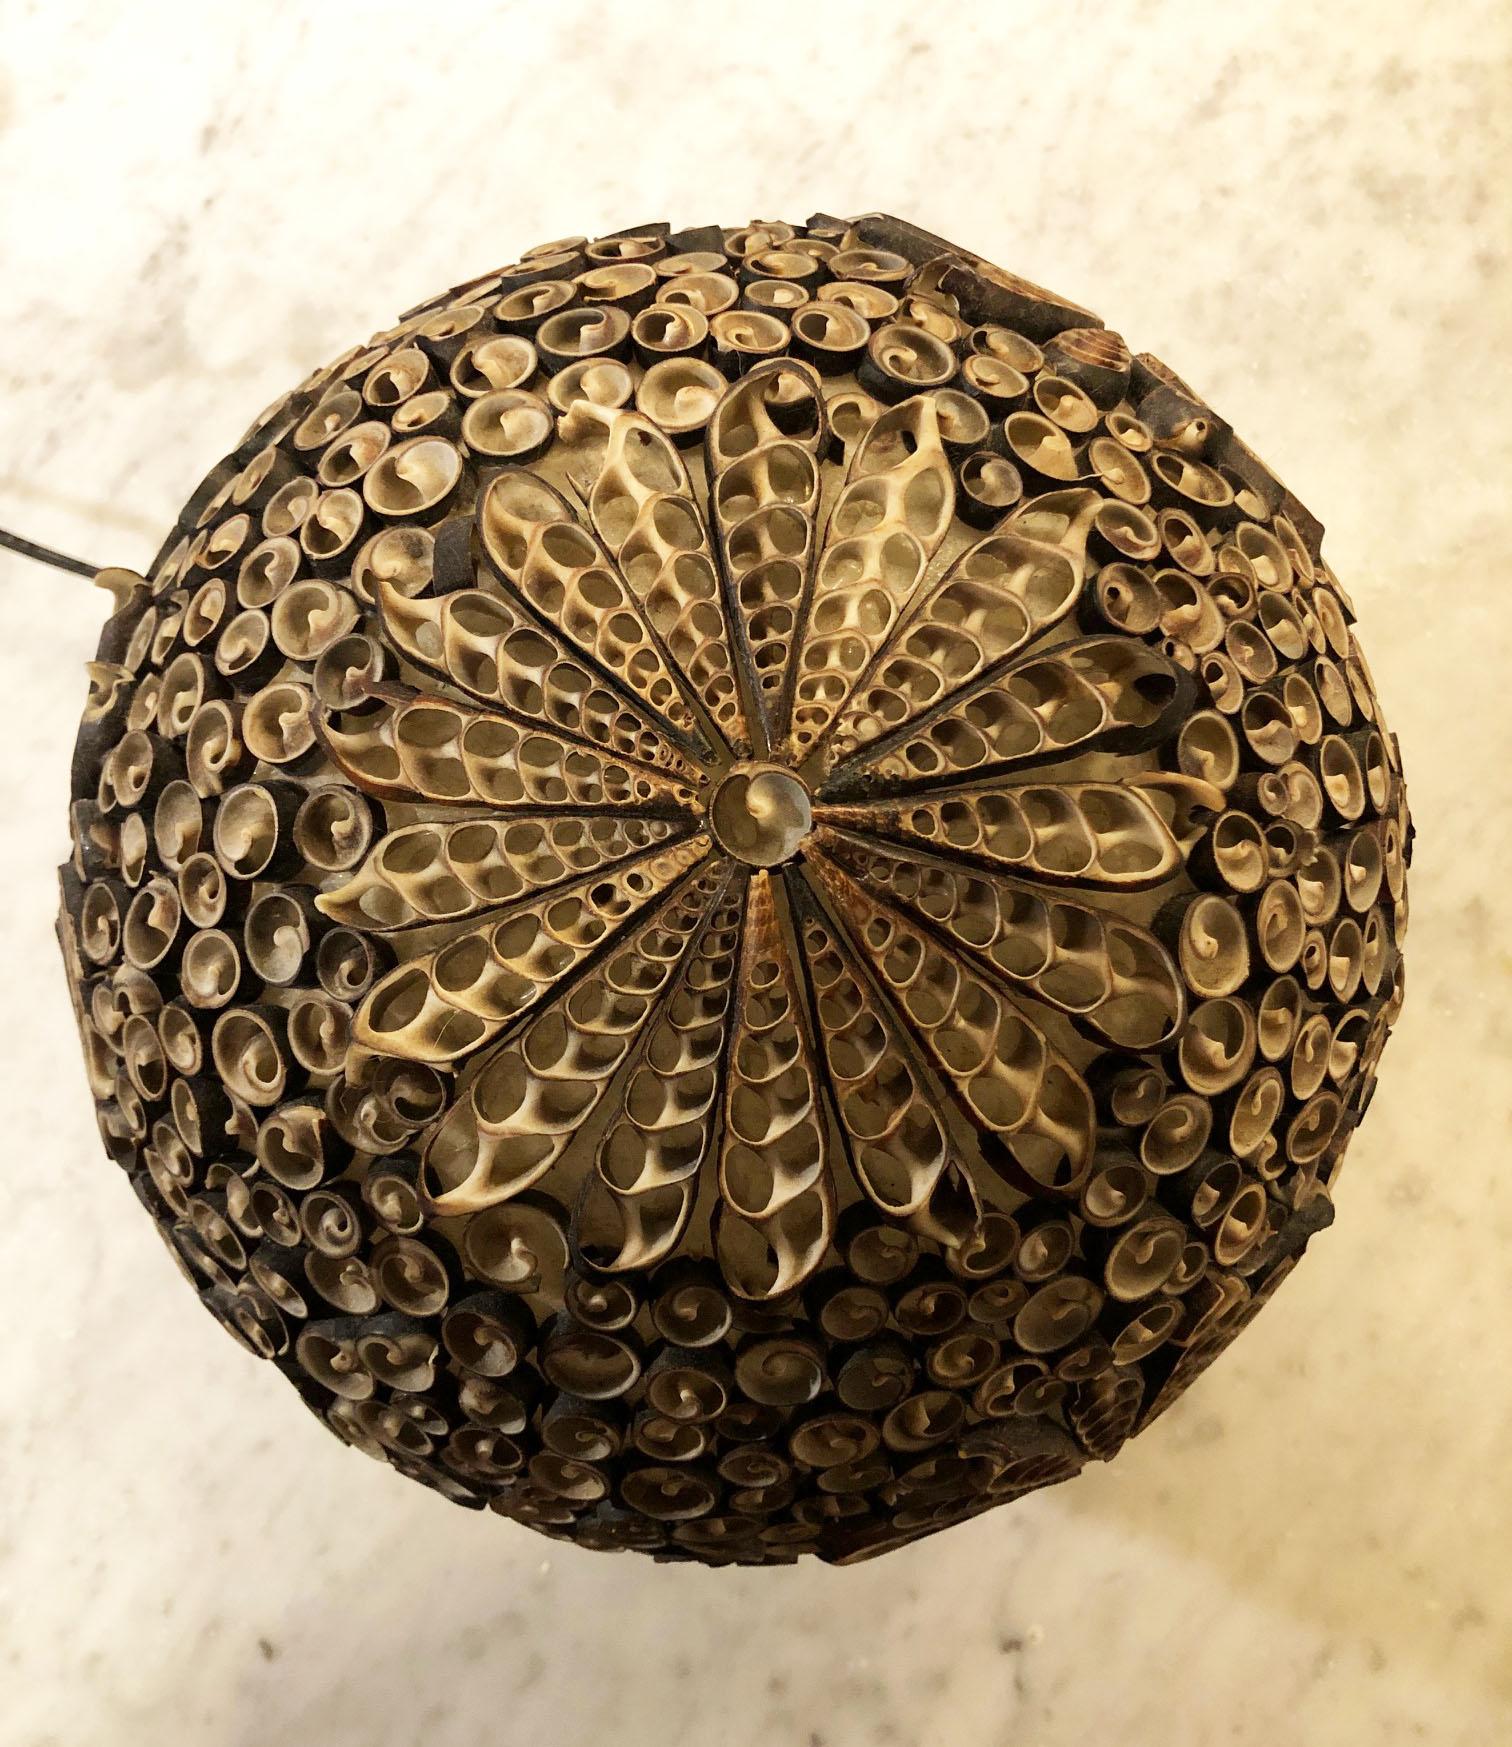 Table lamp with plastic sphere manually coated with shells, very elegant.
In working condition.
Equipped with original 20th century European wiring.
We recommend buyer consults an experienced electrician for proper installation.
The fixture requires